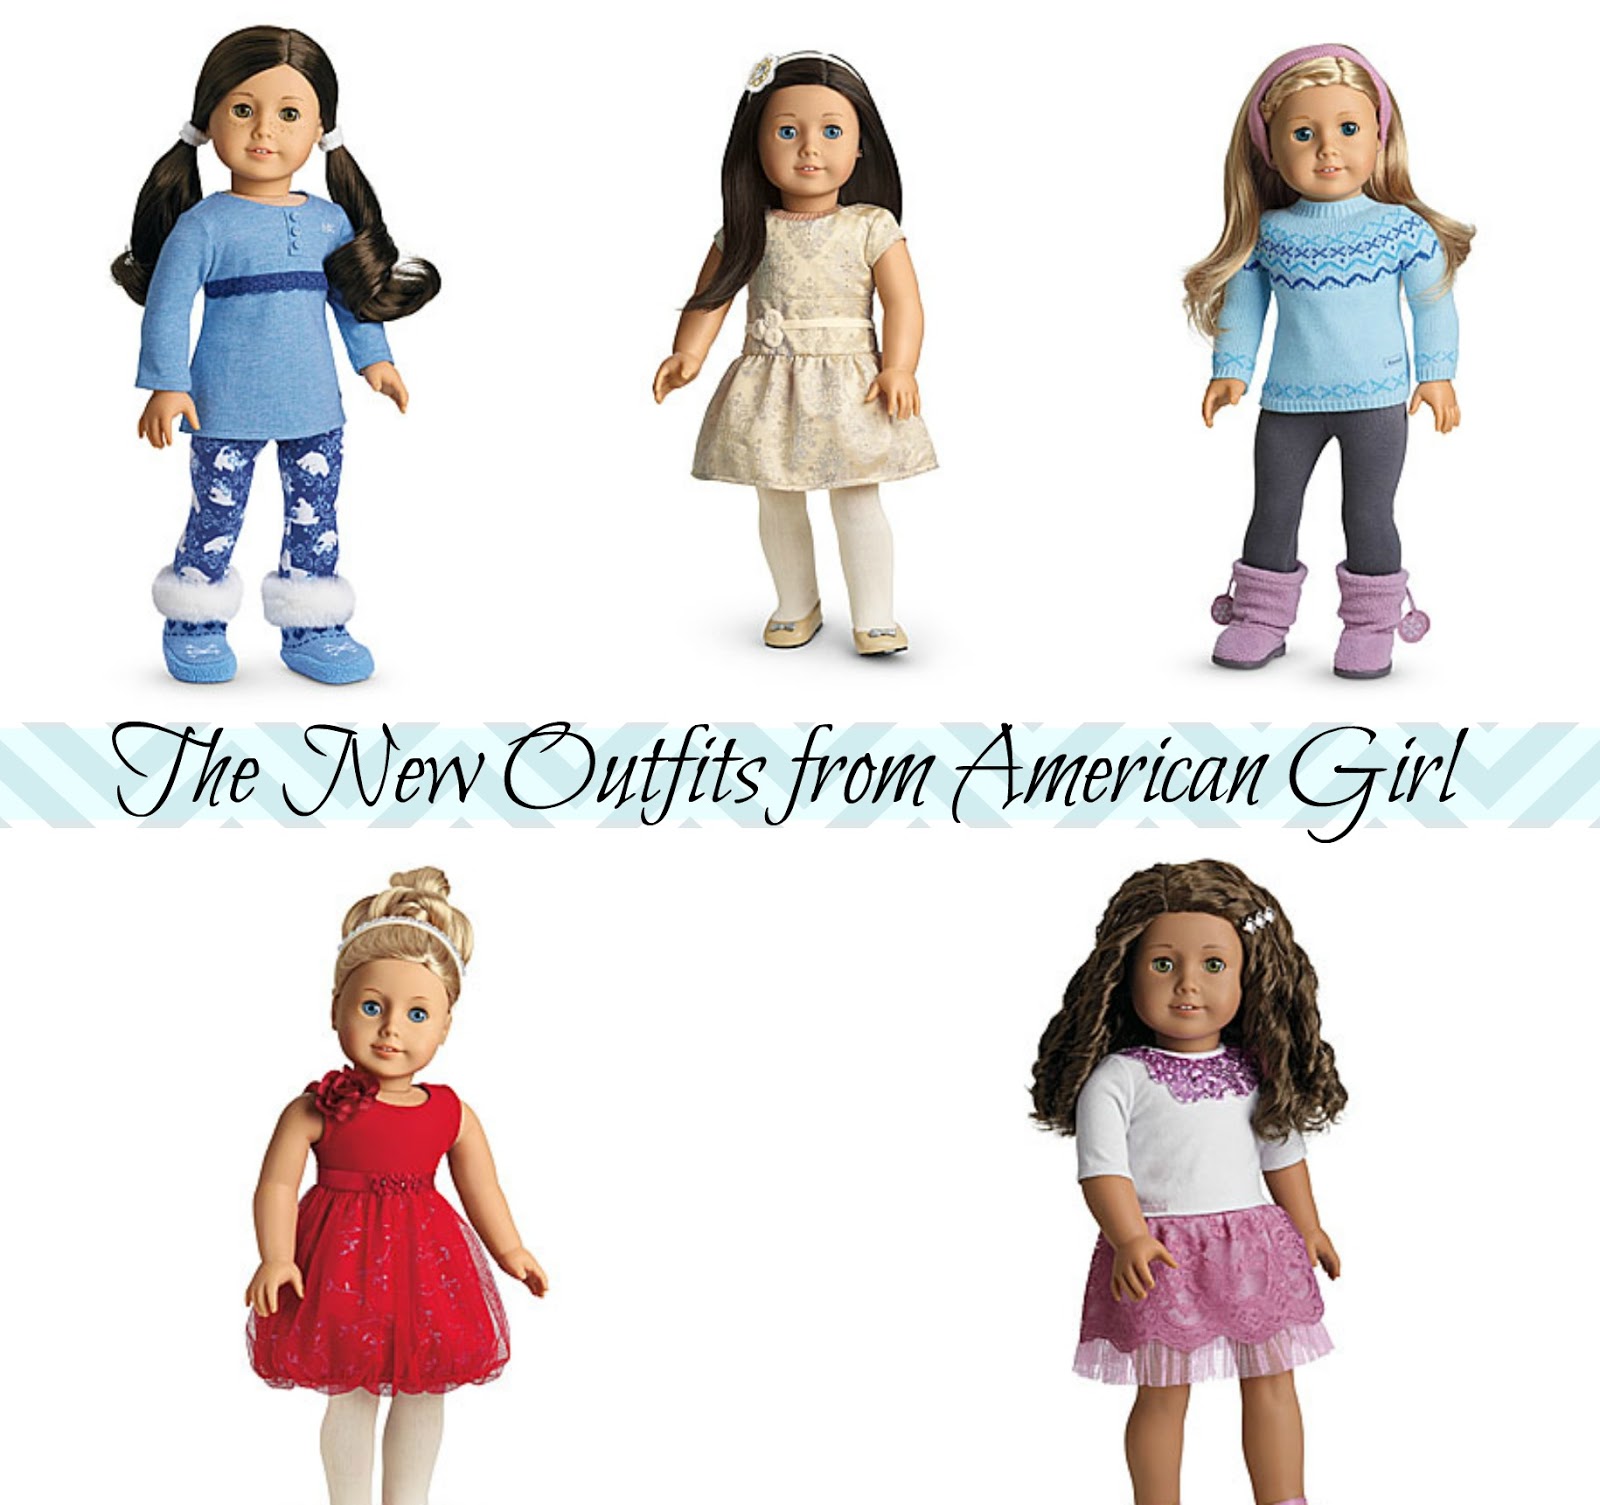 The Salty Breeze: The New Outfits from American Girl: What We Think